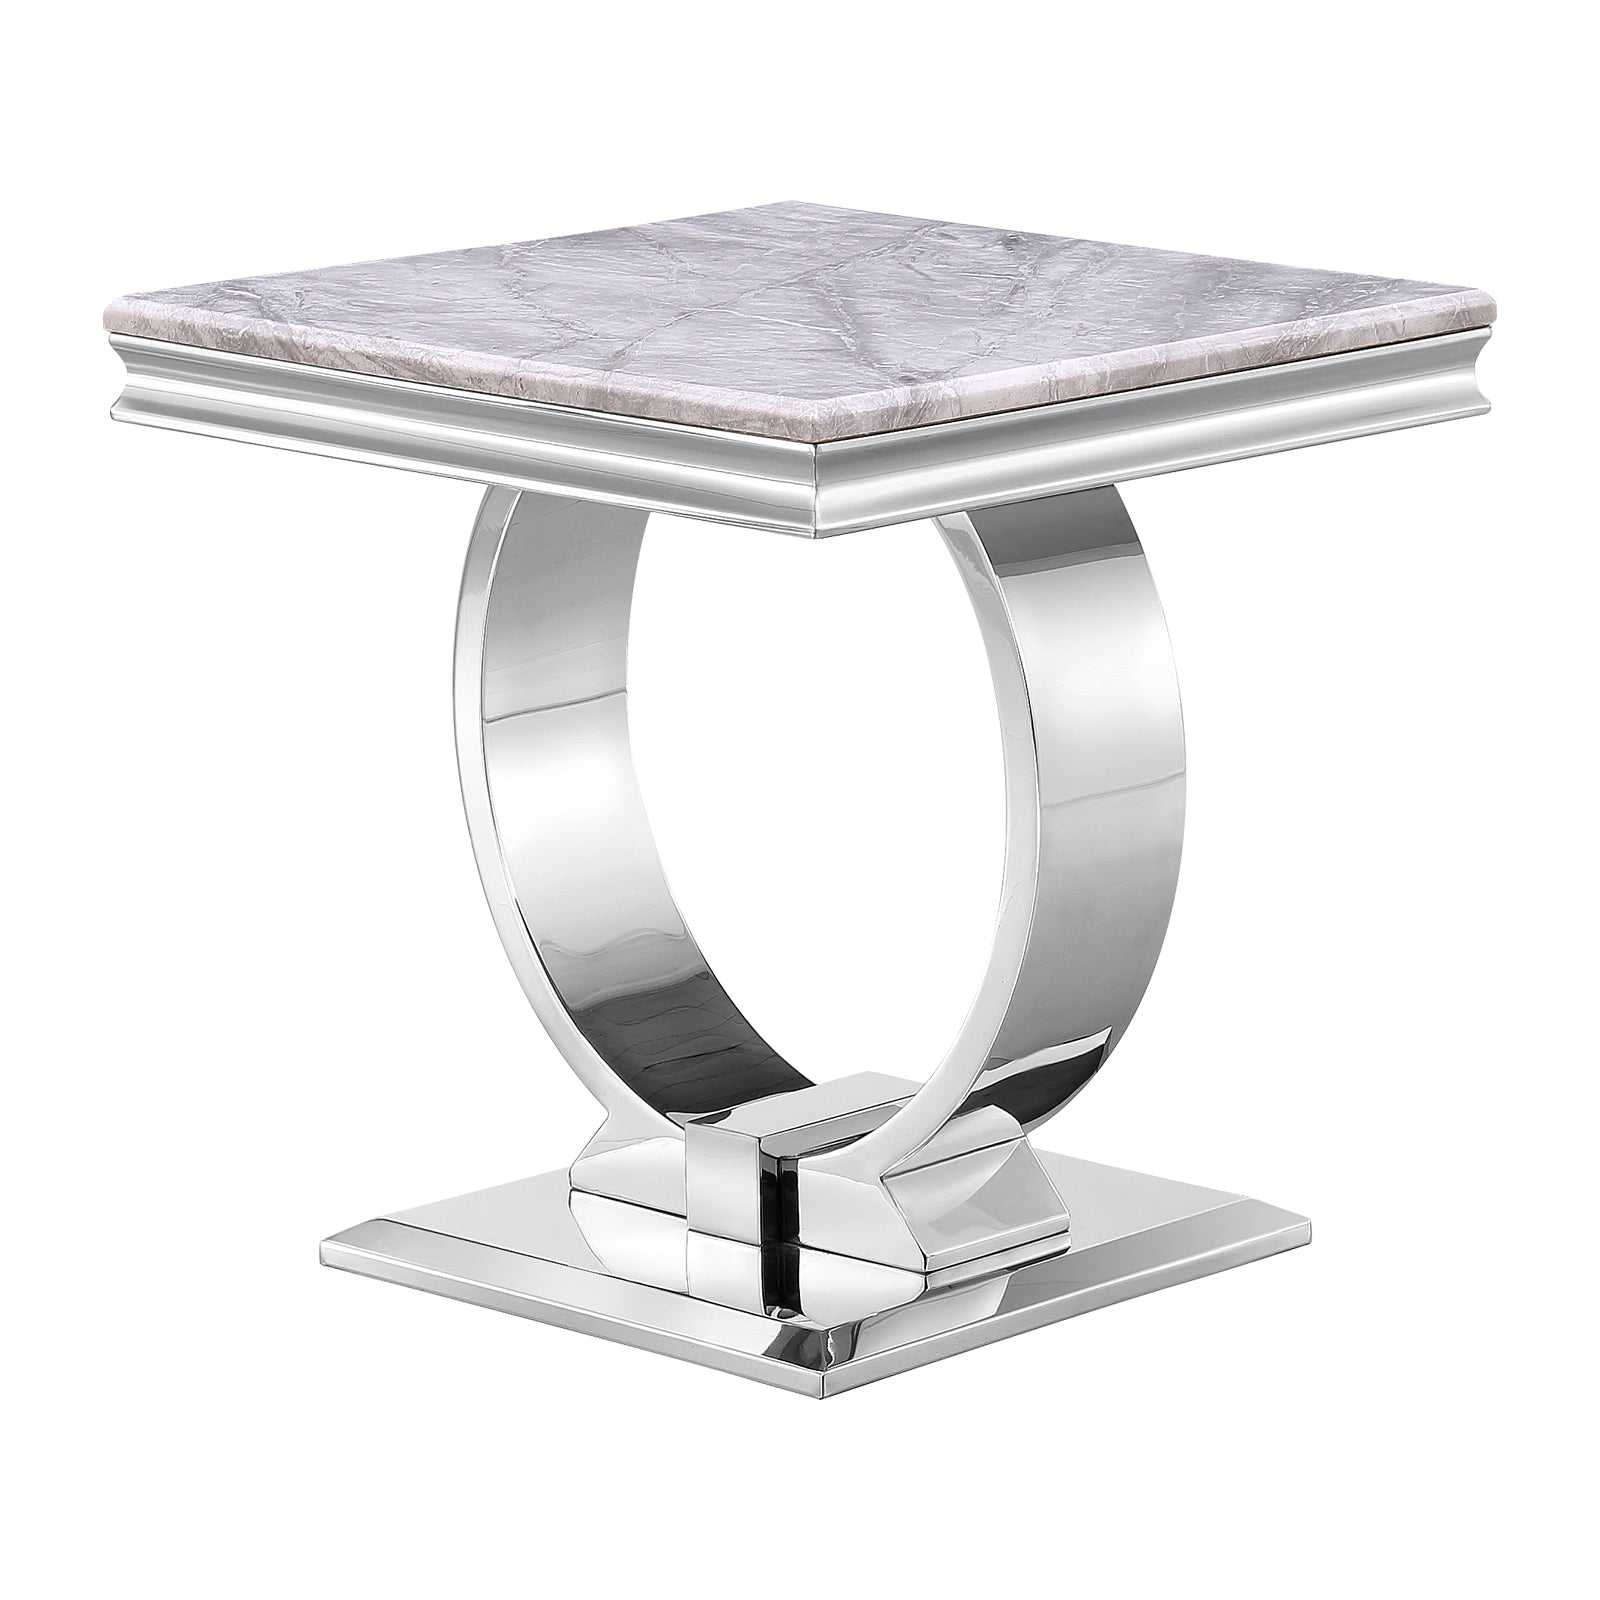 The Benefits of a Silver End Table for Modern Decor